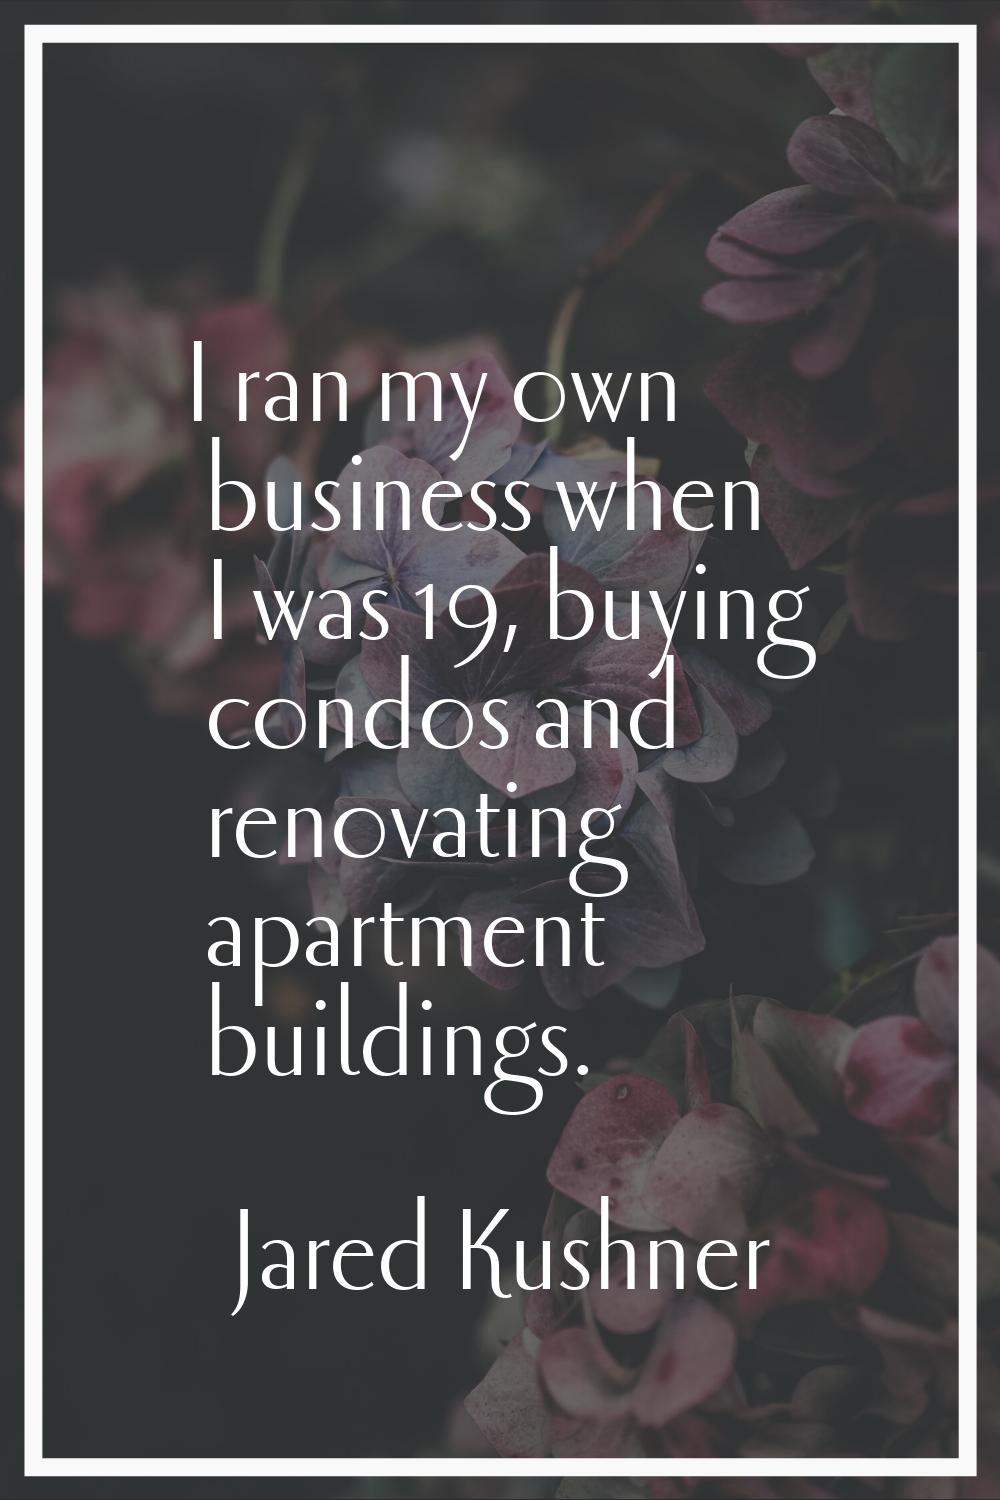 I ran my own business when I was 19, buying condos and renovating apartment buildings.